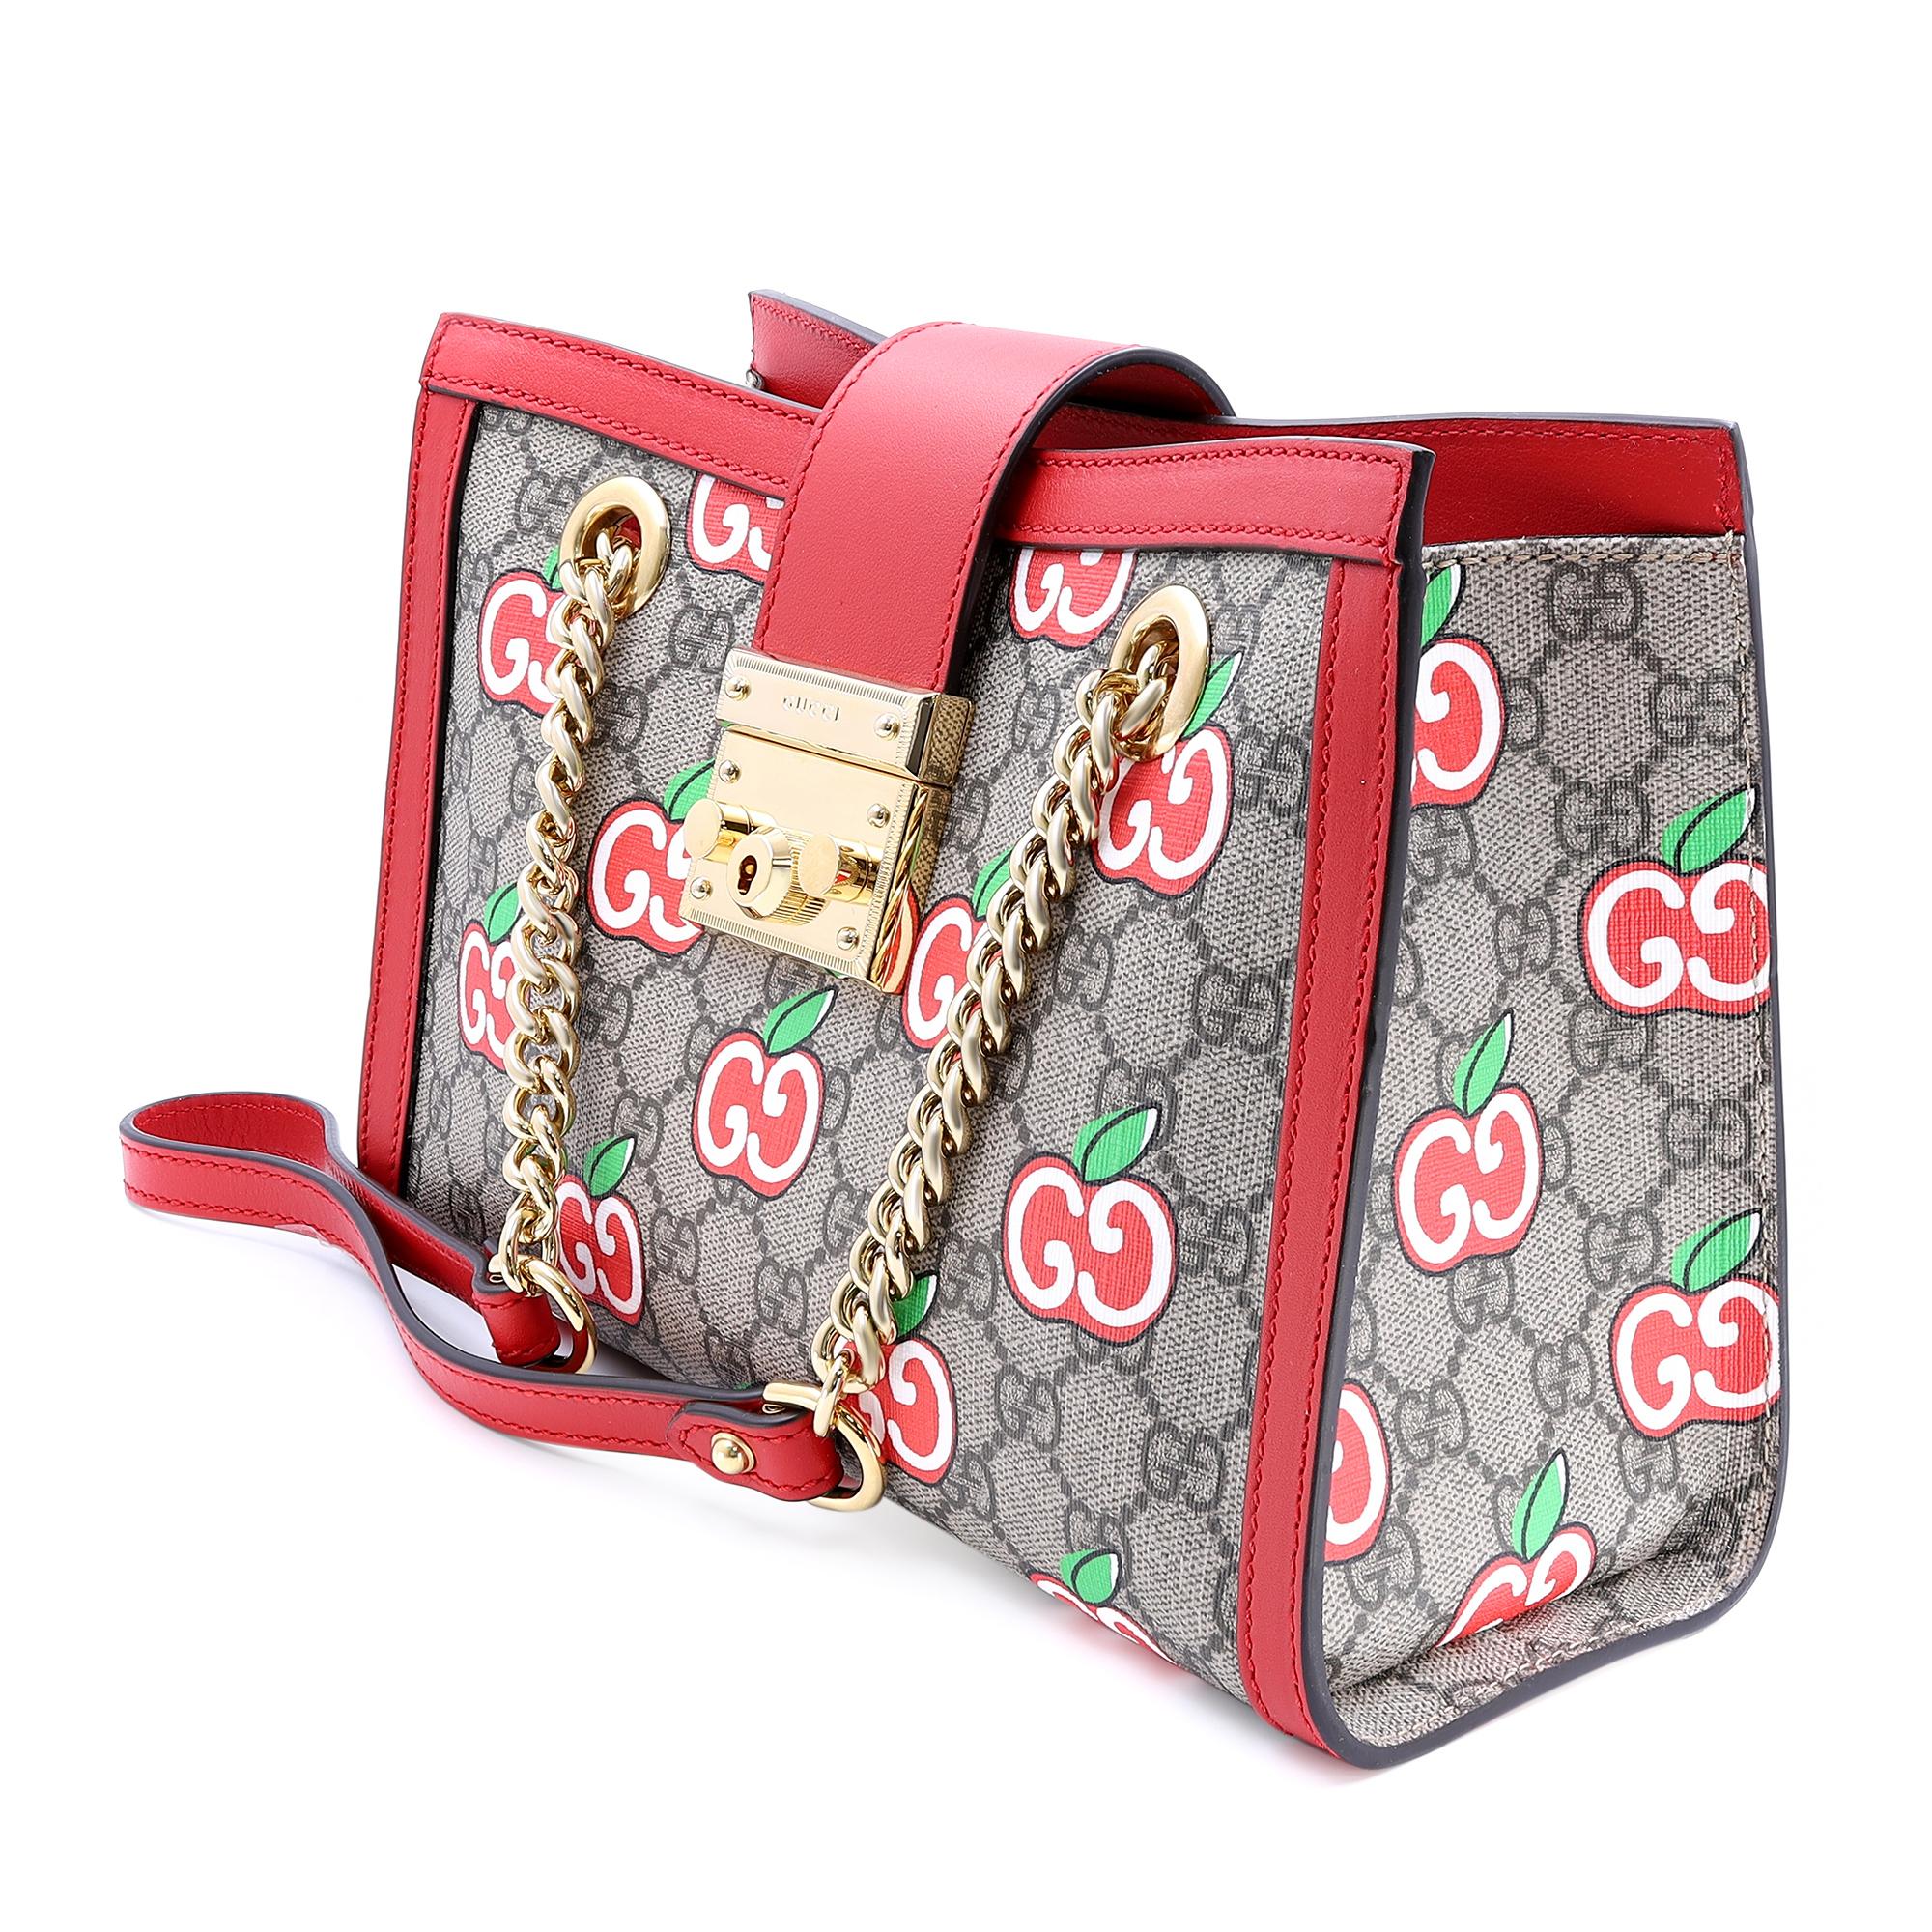 Gucci Padlock small shoulder bag featuring apple print GG supreme canvas with red leather trim. Comes with a half chain and half leather shoulder straps. Push snap flap closure. The top opens to a beige microfiber lining with two interior patch